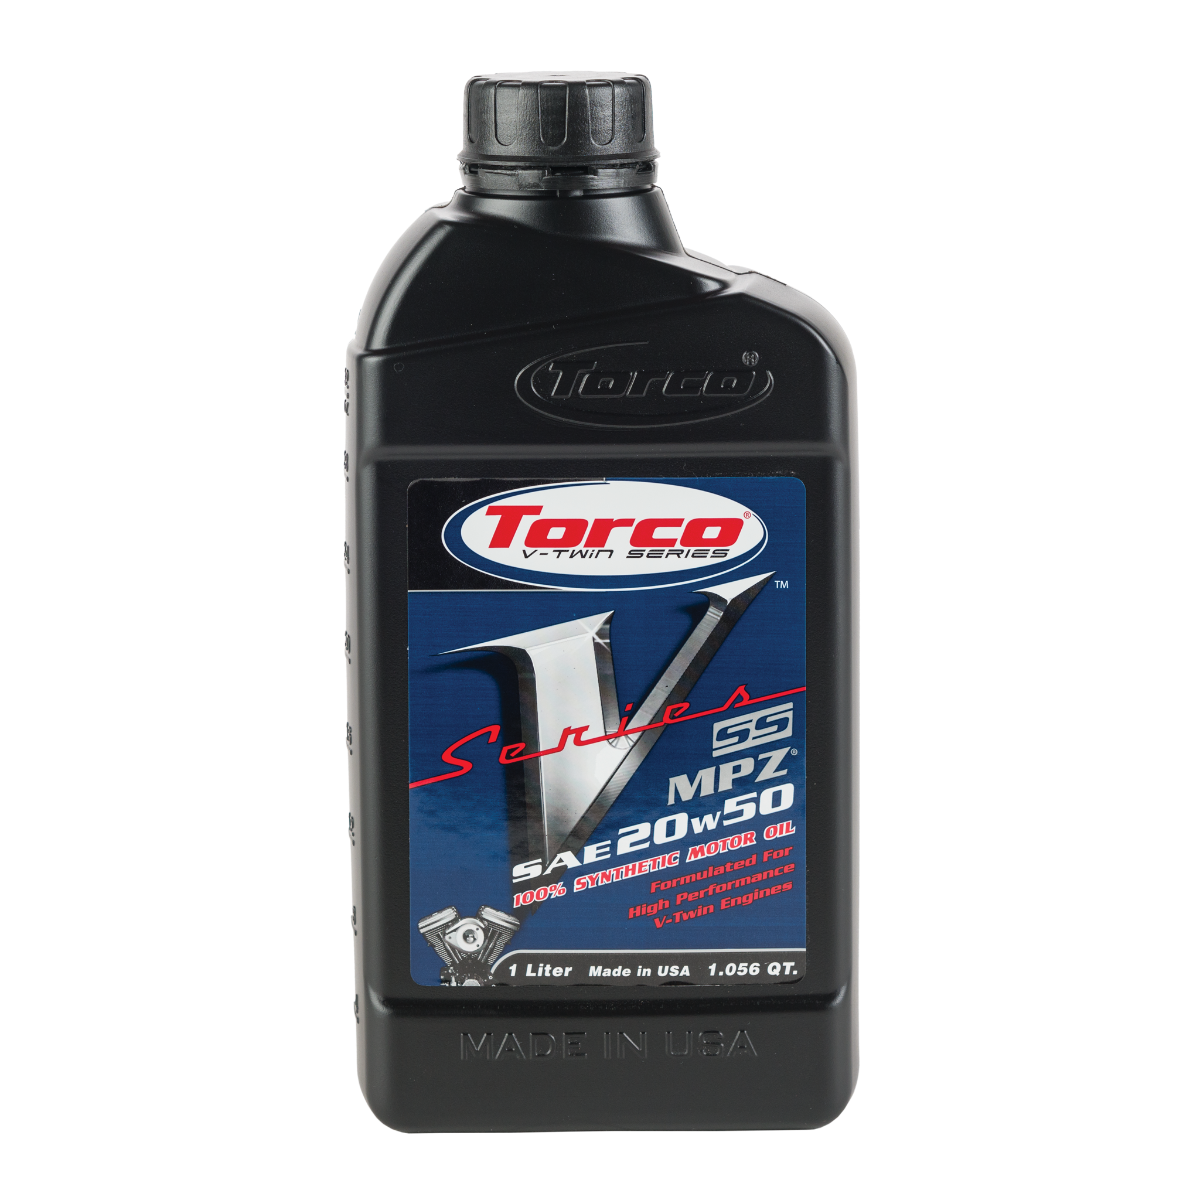 V-Series SS 20W50 Synthetic Oil - TorcoUSA